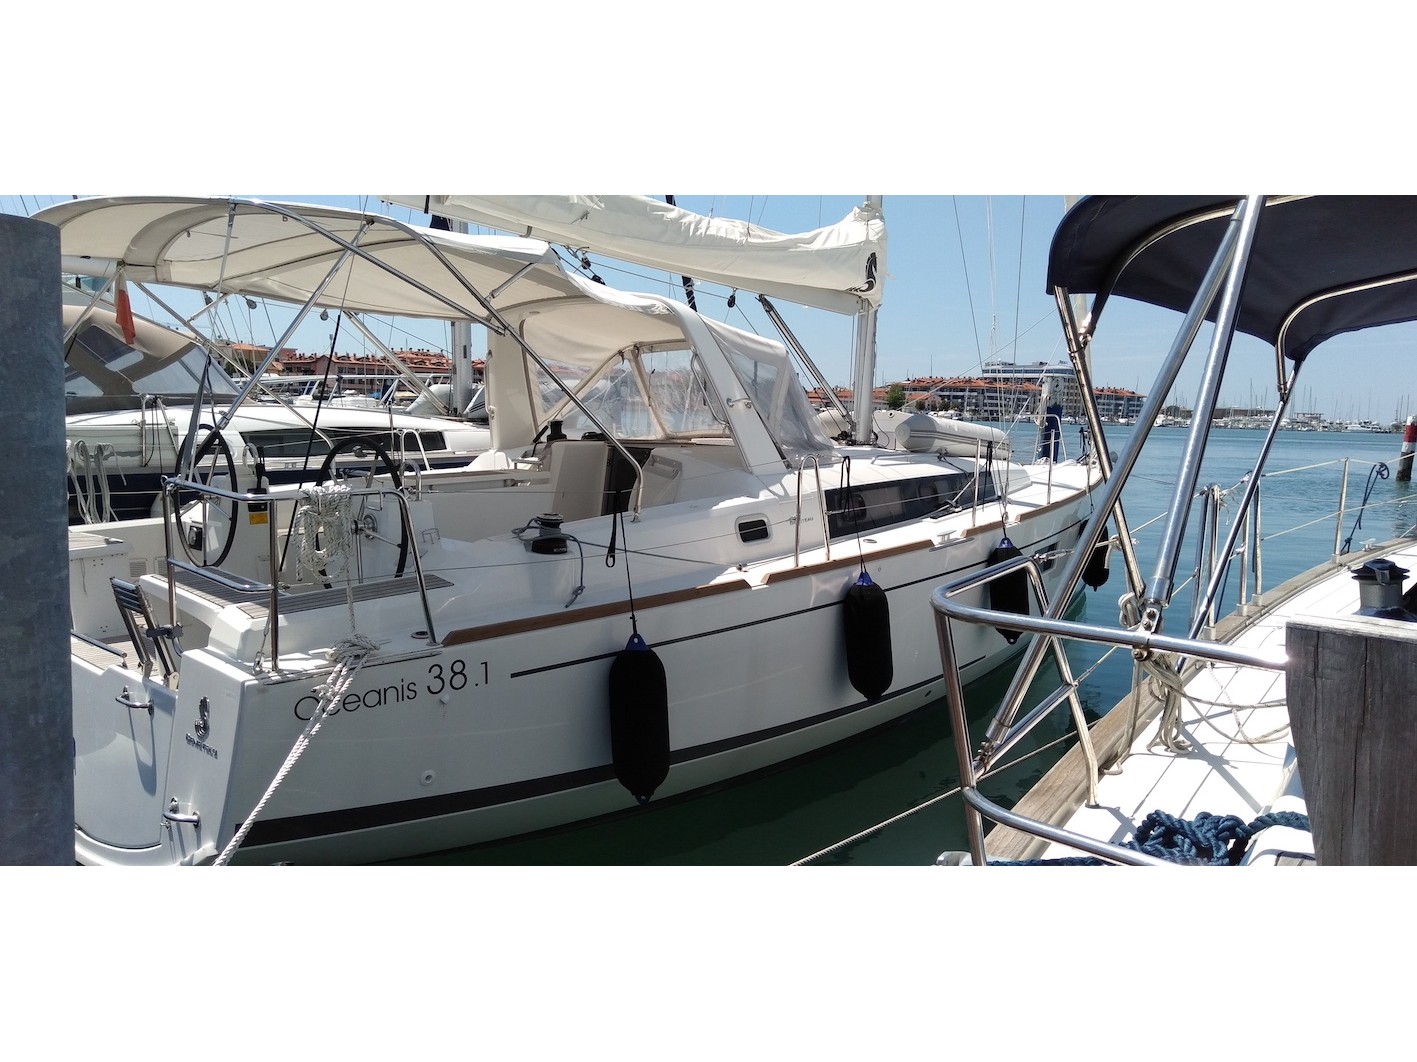 Oceanis 38.1 - Yacht Charter Caorle & Boat hire in Italy Veneto Caorle Caorle 1